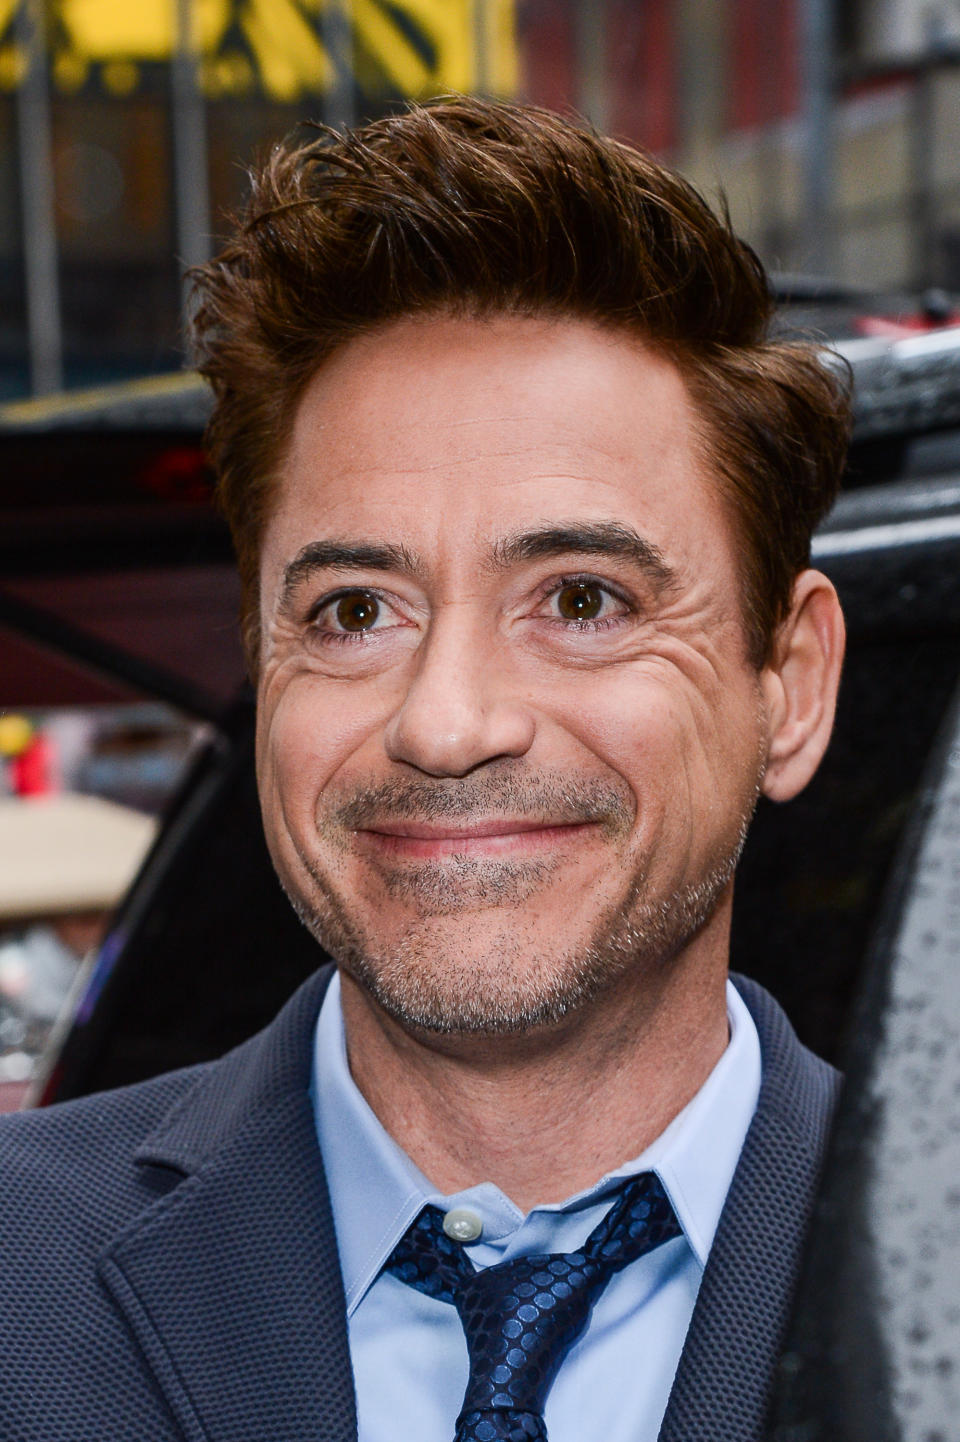 NEW YORK, NY - APRIL 29:  Actor Robert Downey Jr. leaves the 'Good Morning America' taping at the ABC Times Square Studios on April 29, 2013 in New York City.  (Photo by Ray Tamarra/Getty Images)